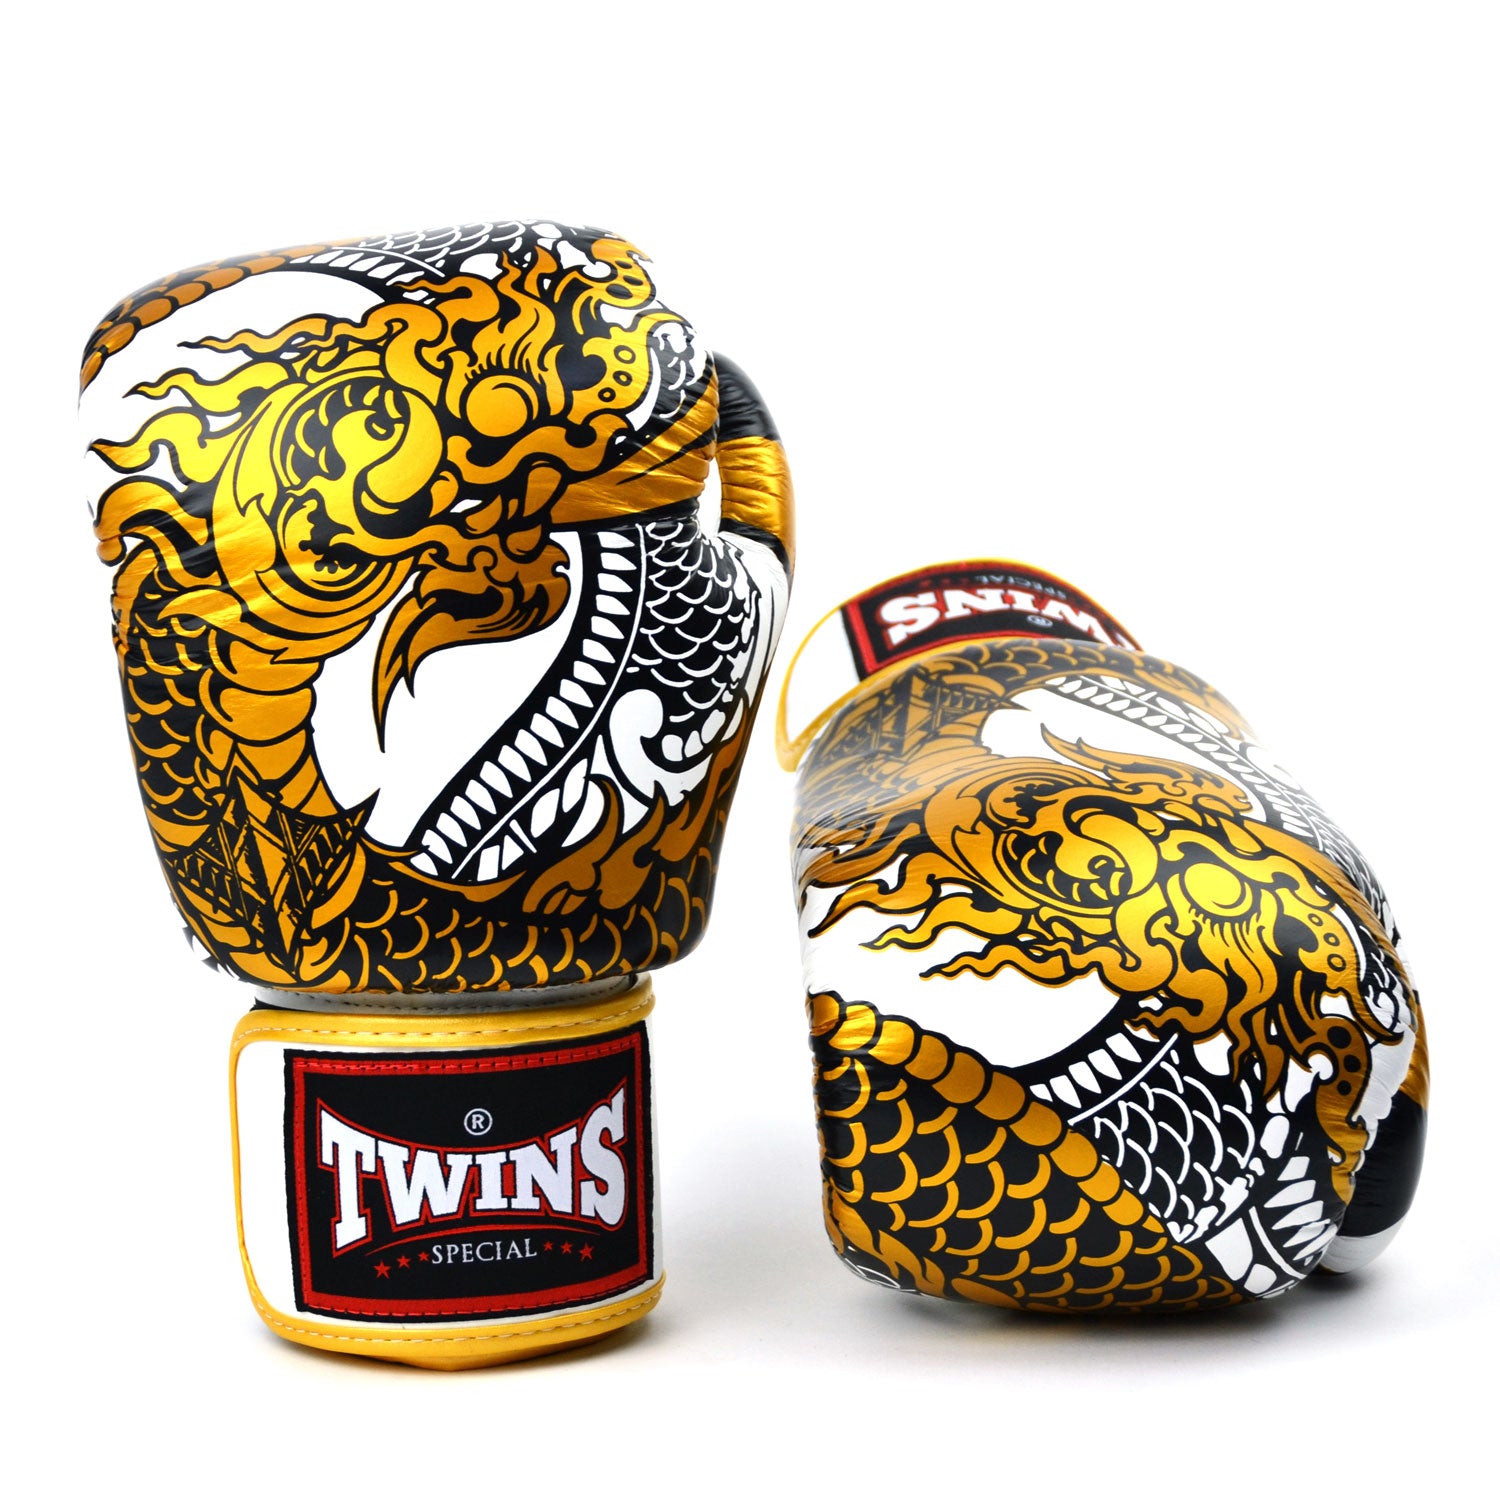 Image of FBGVL3-52 Twins White-Gold Nagas Boxing Gloves